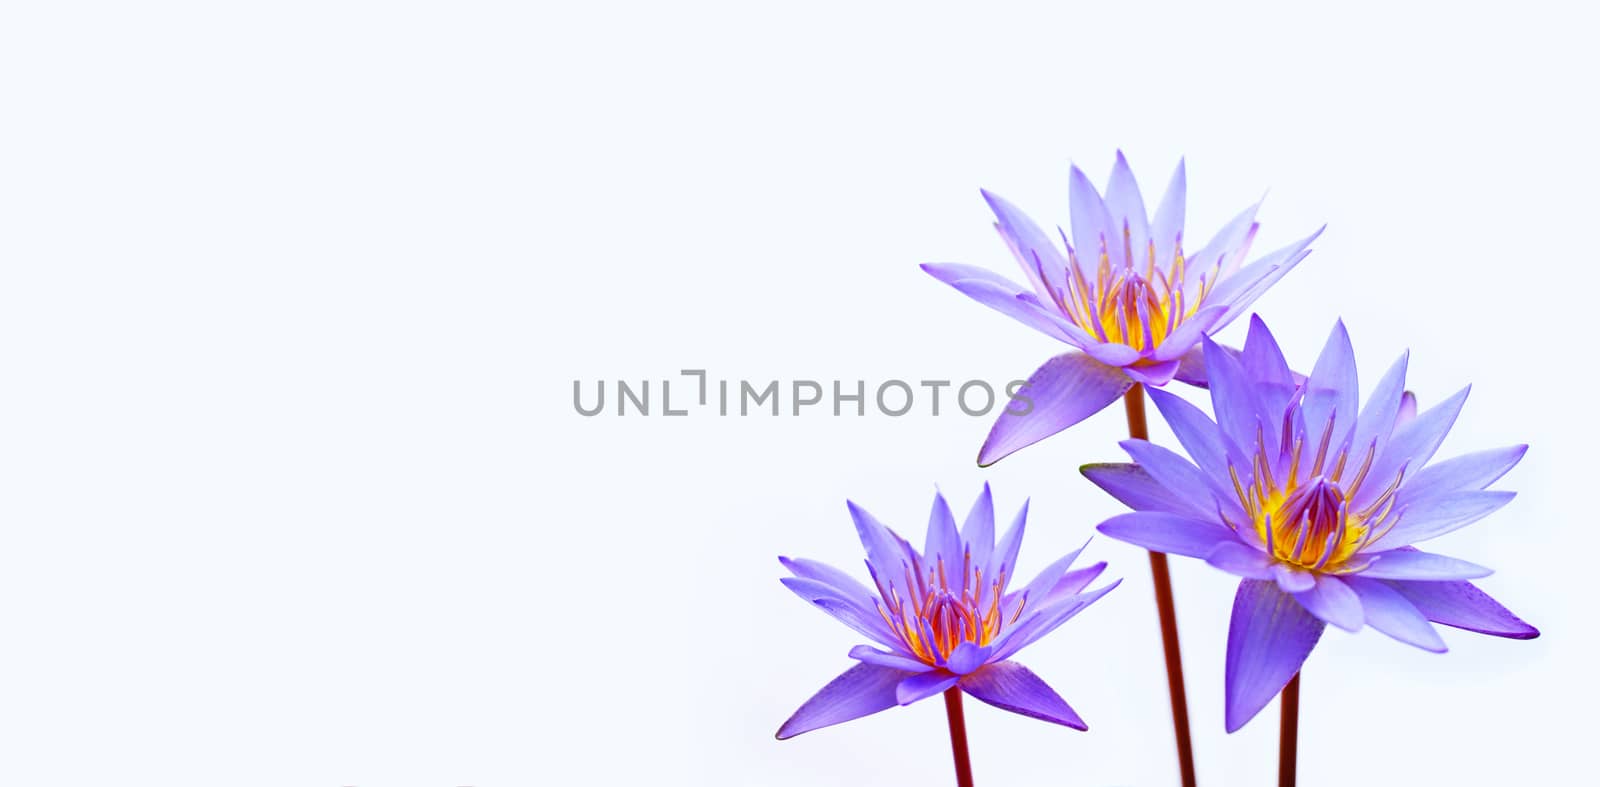 Purple water lilies, Violet lotus blooming on white background. Colorful flower garden, Copy space